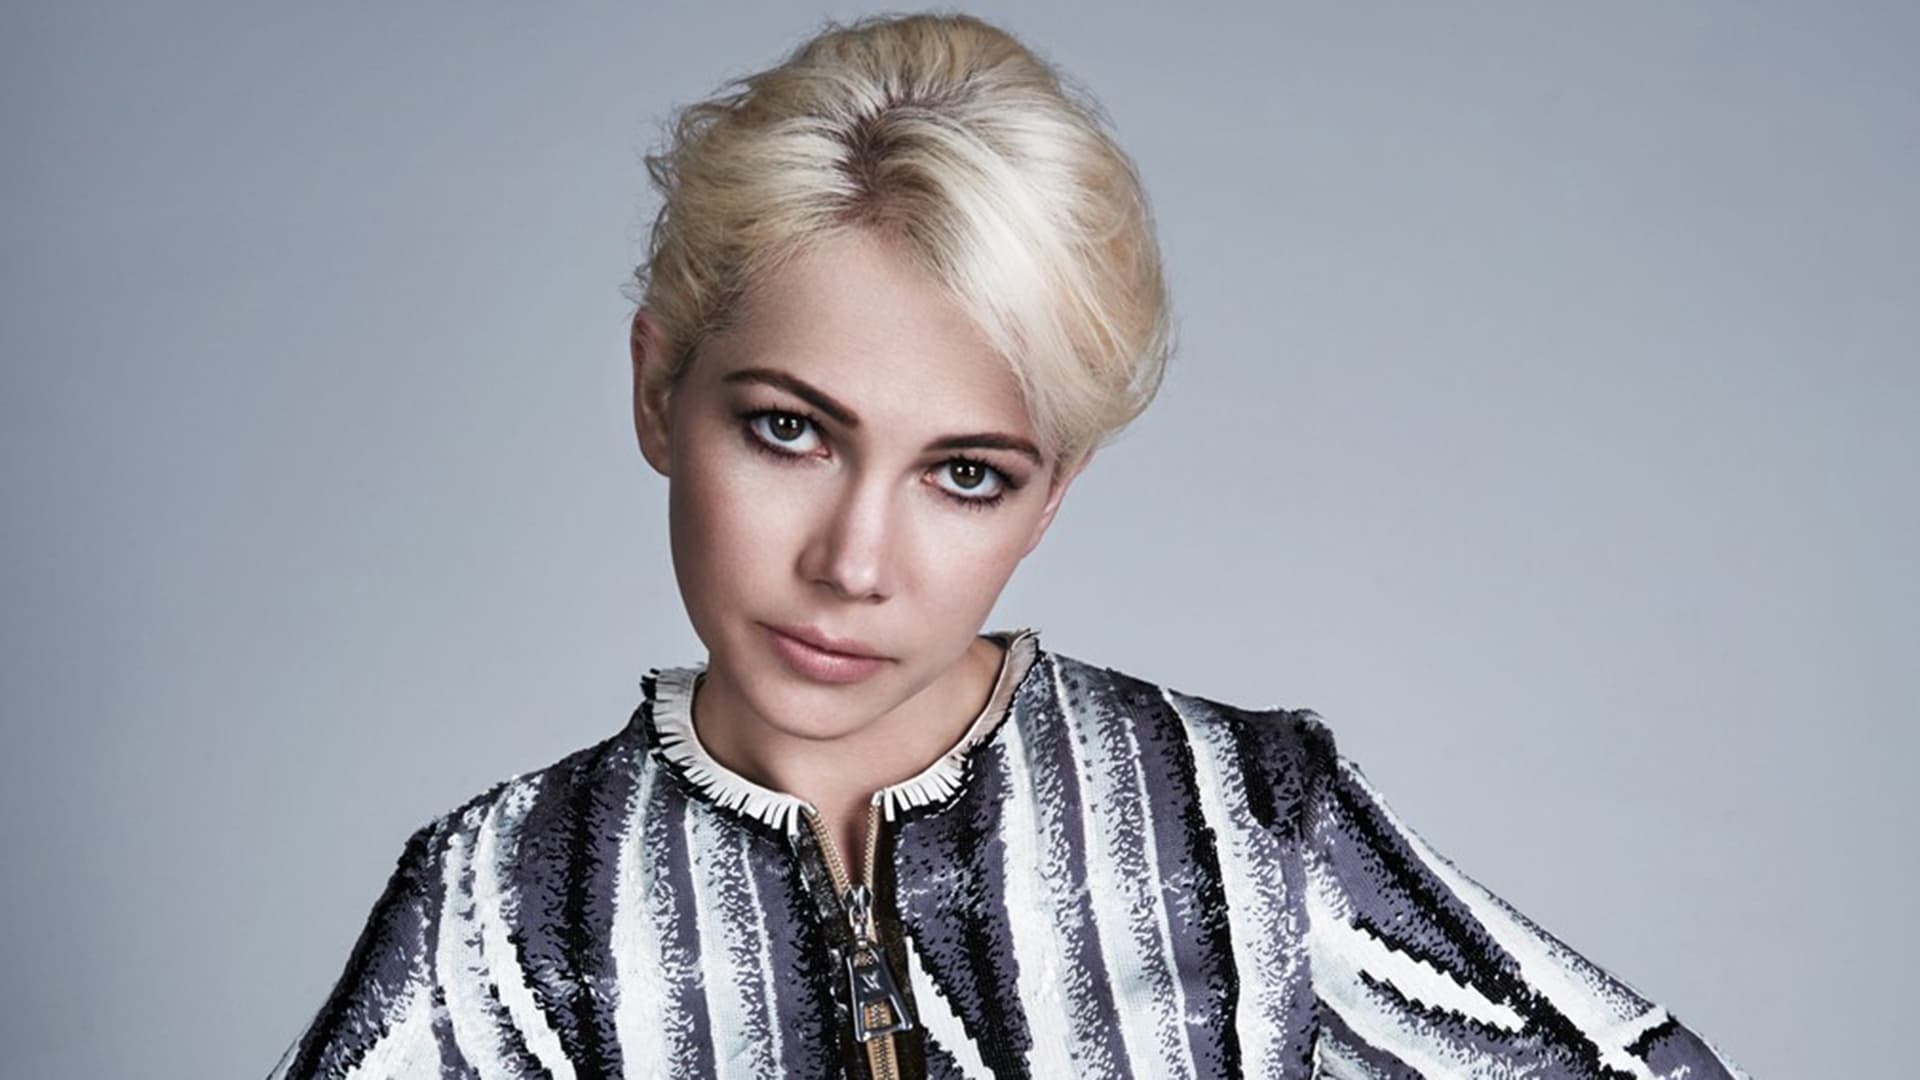 1920x1080 Michelle Williams Wallpaper Hd High Quality Resolution Download